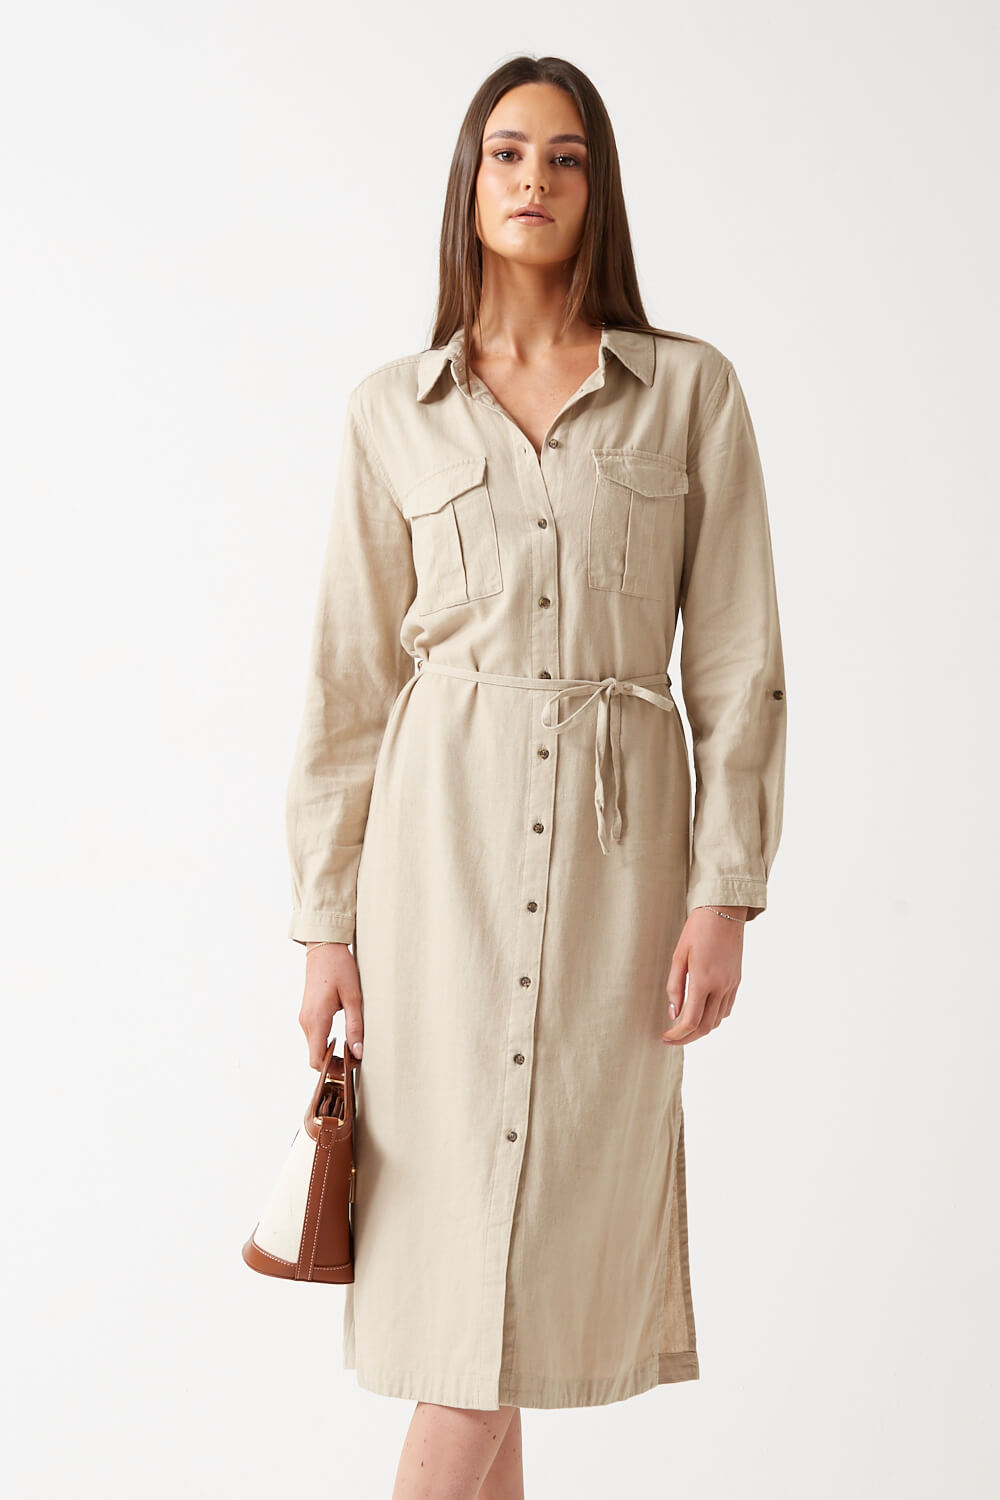 Only Caro Linen Shirt Dress in Beige | iCLOTHING - iCLOTHING